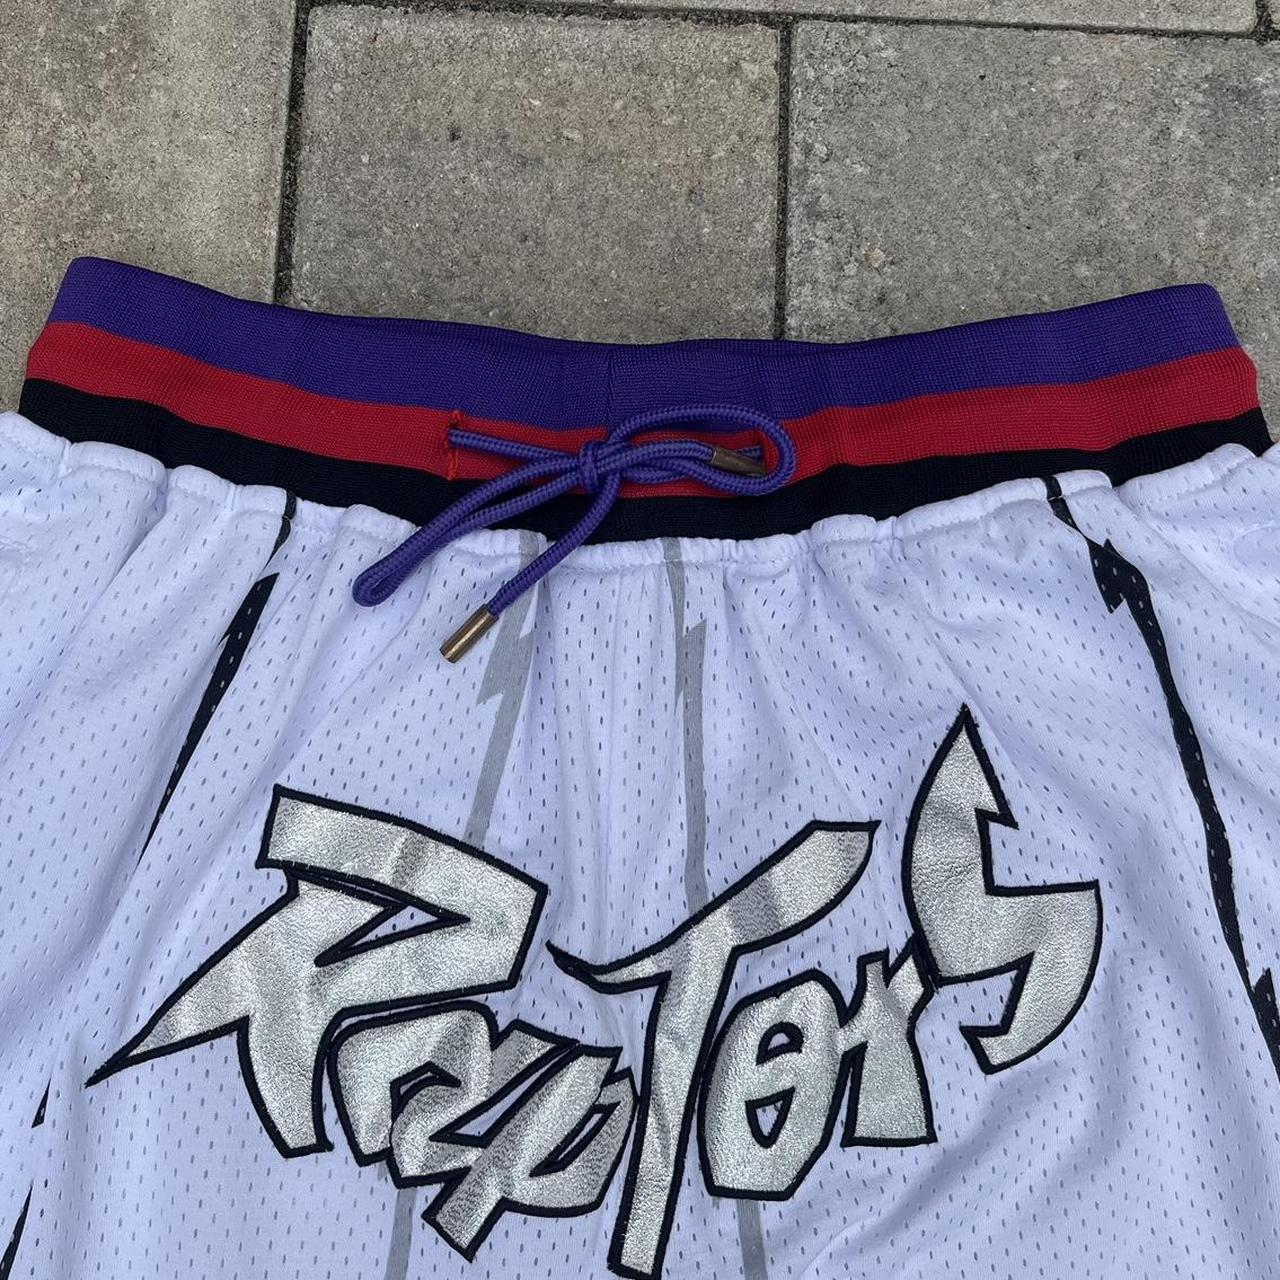 Vintage black white and red nba shorts with logo on - Depop